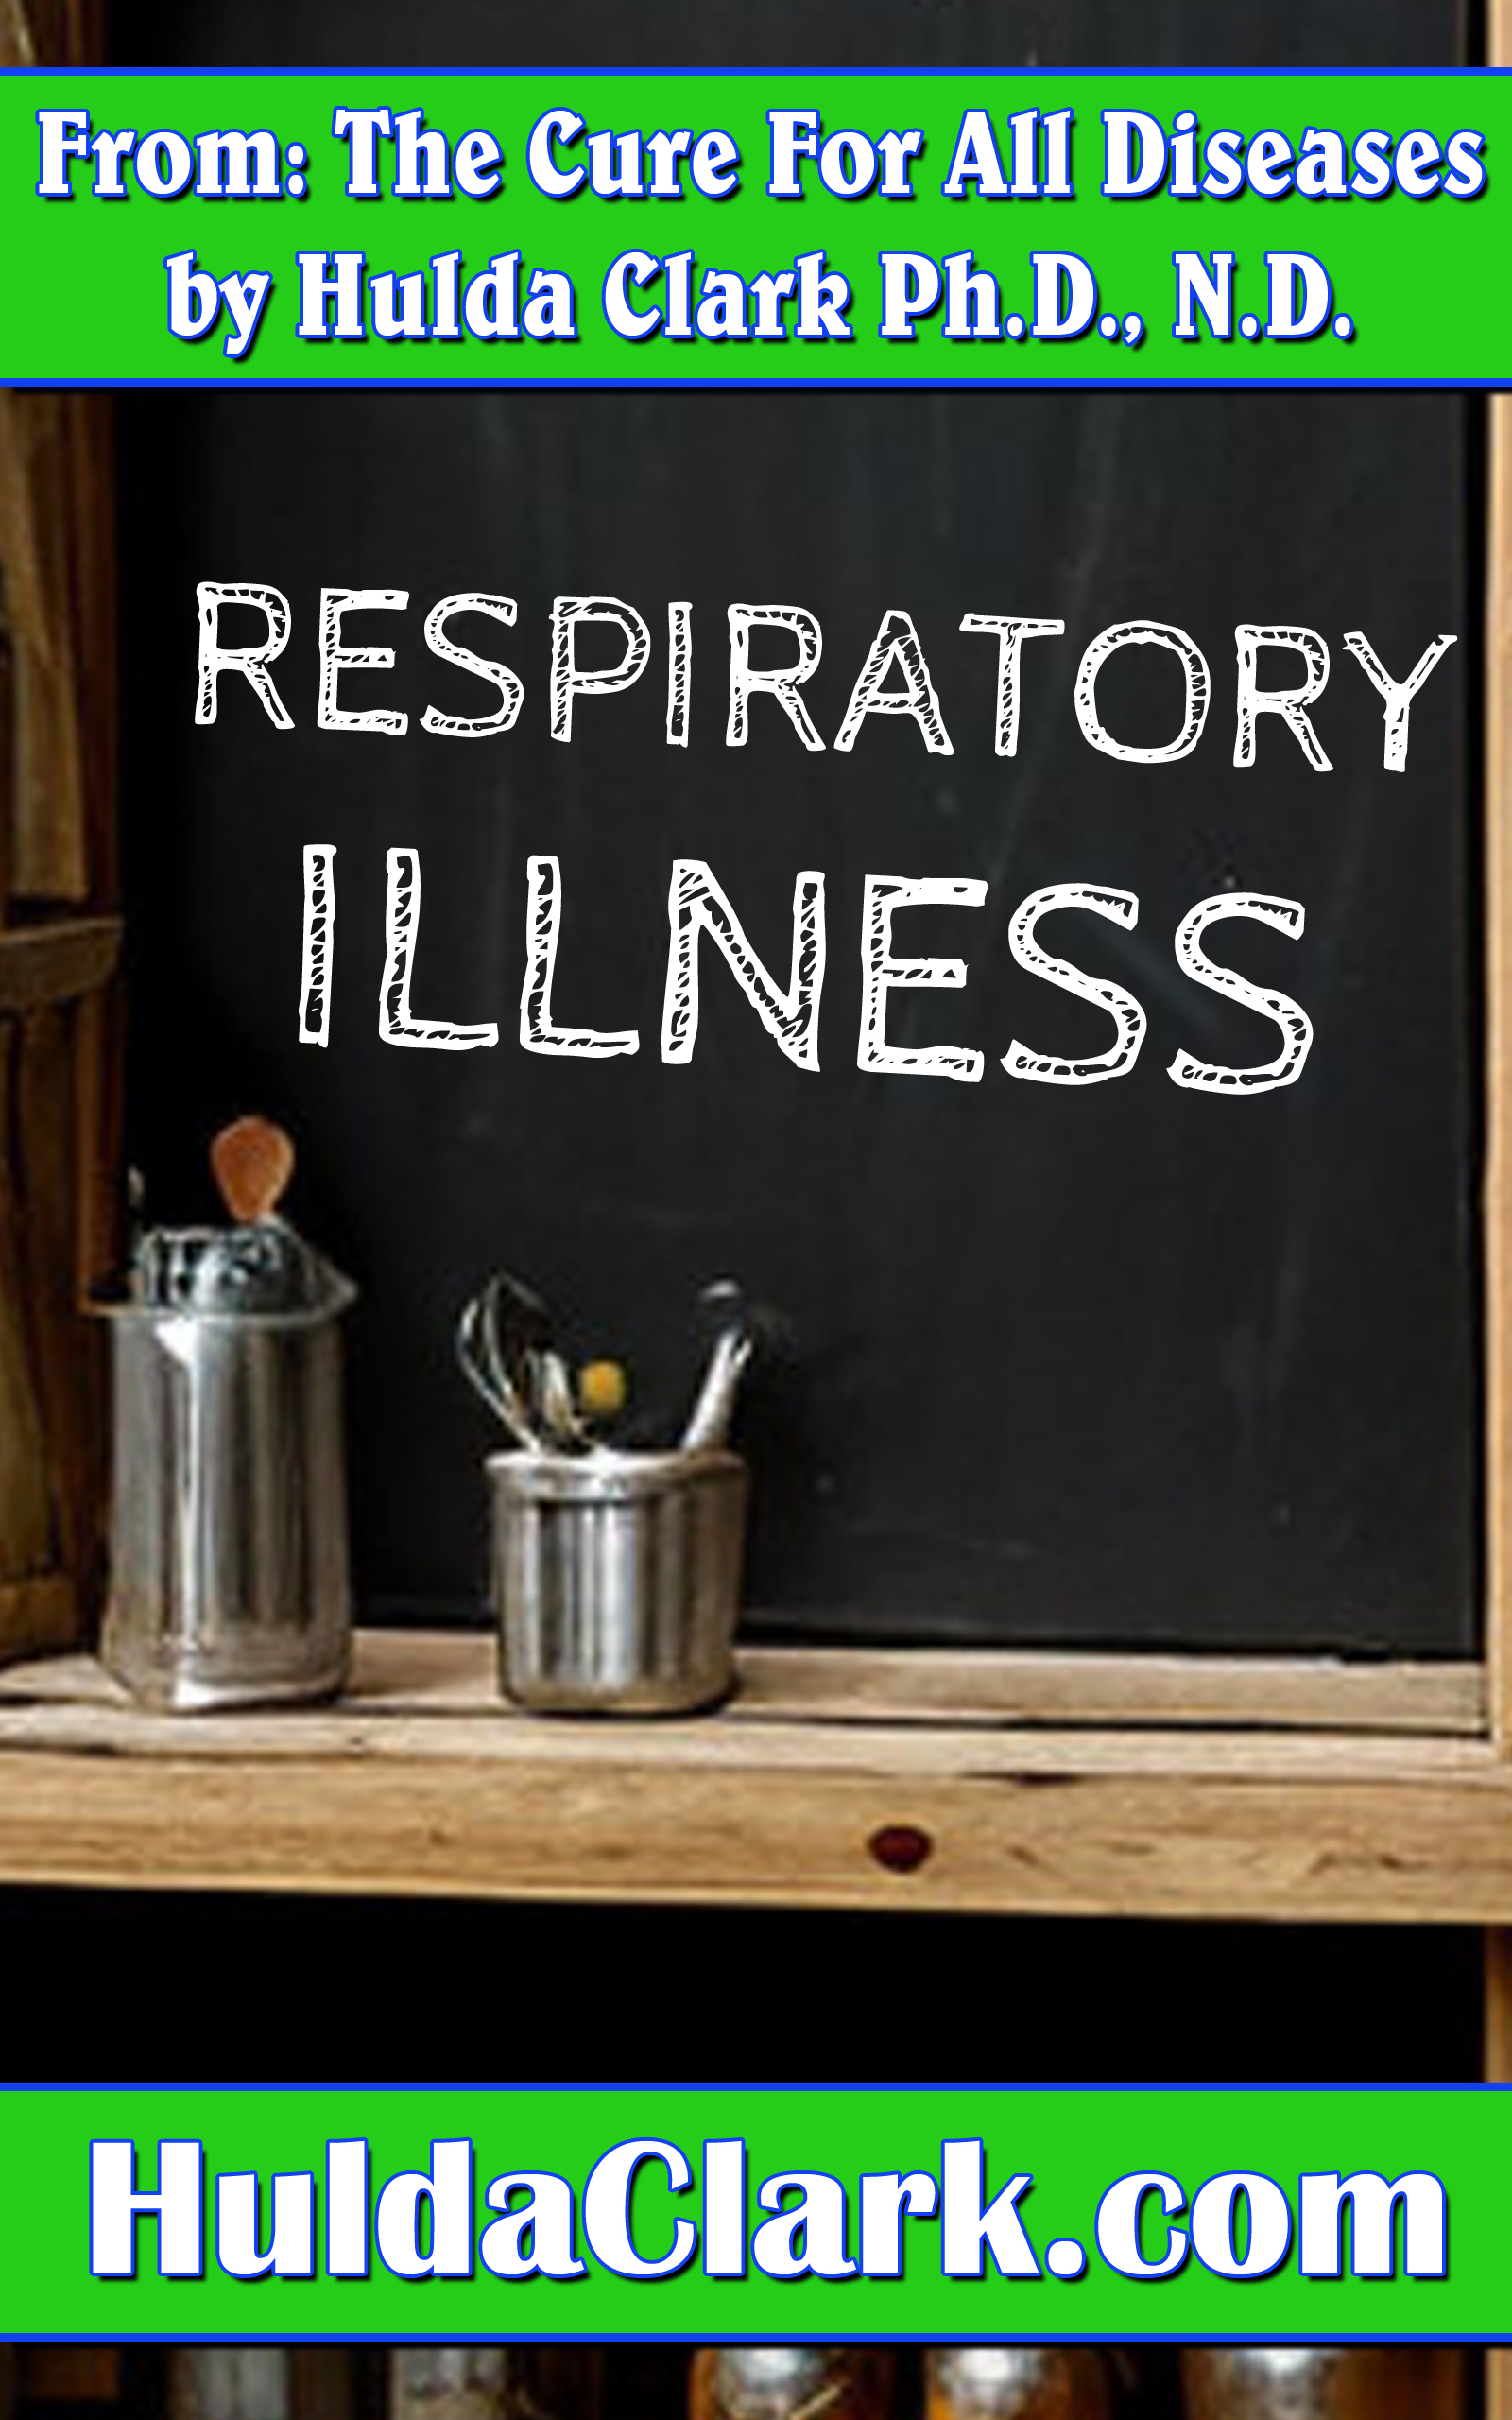 Respiratory Illness Ebook excerpt from The Cure for All Diseases by Hulda Clark